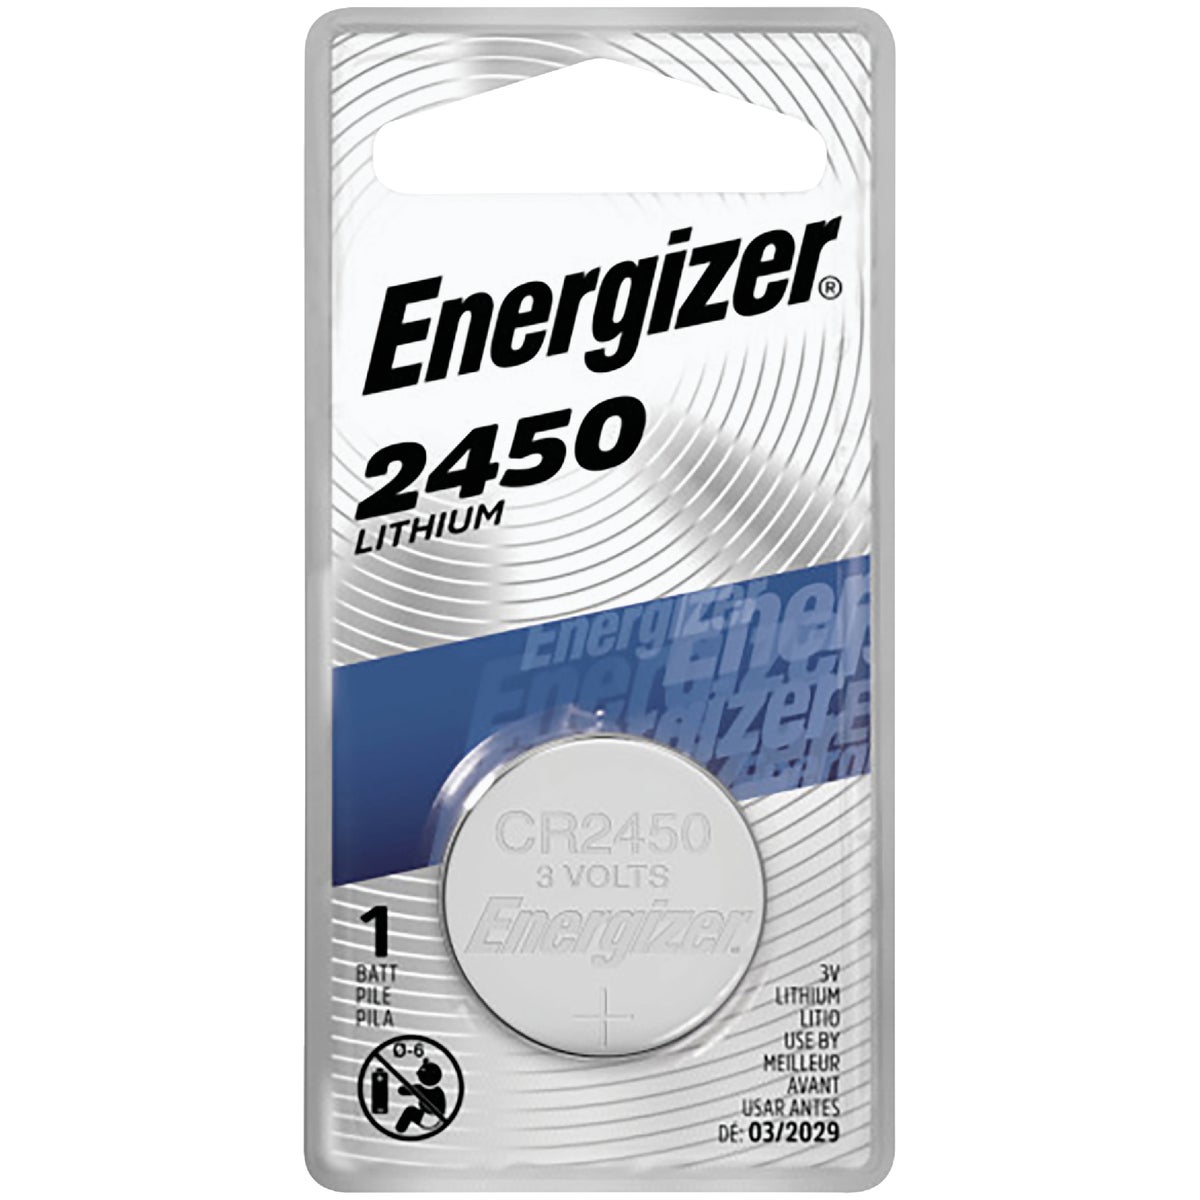 Energizer 2450 Lithium Coin Cell Battery